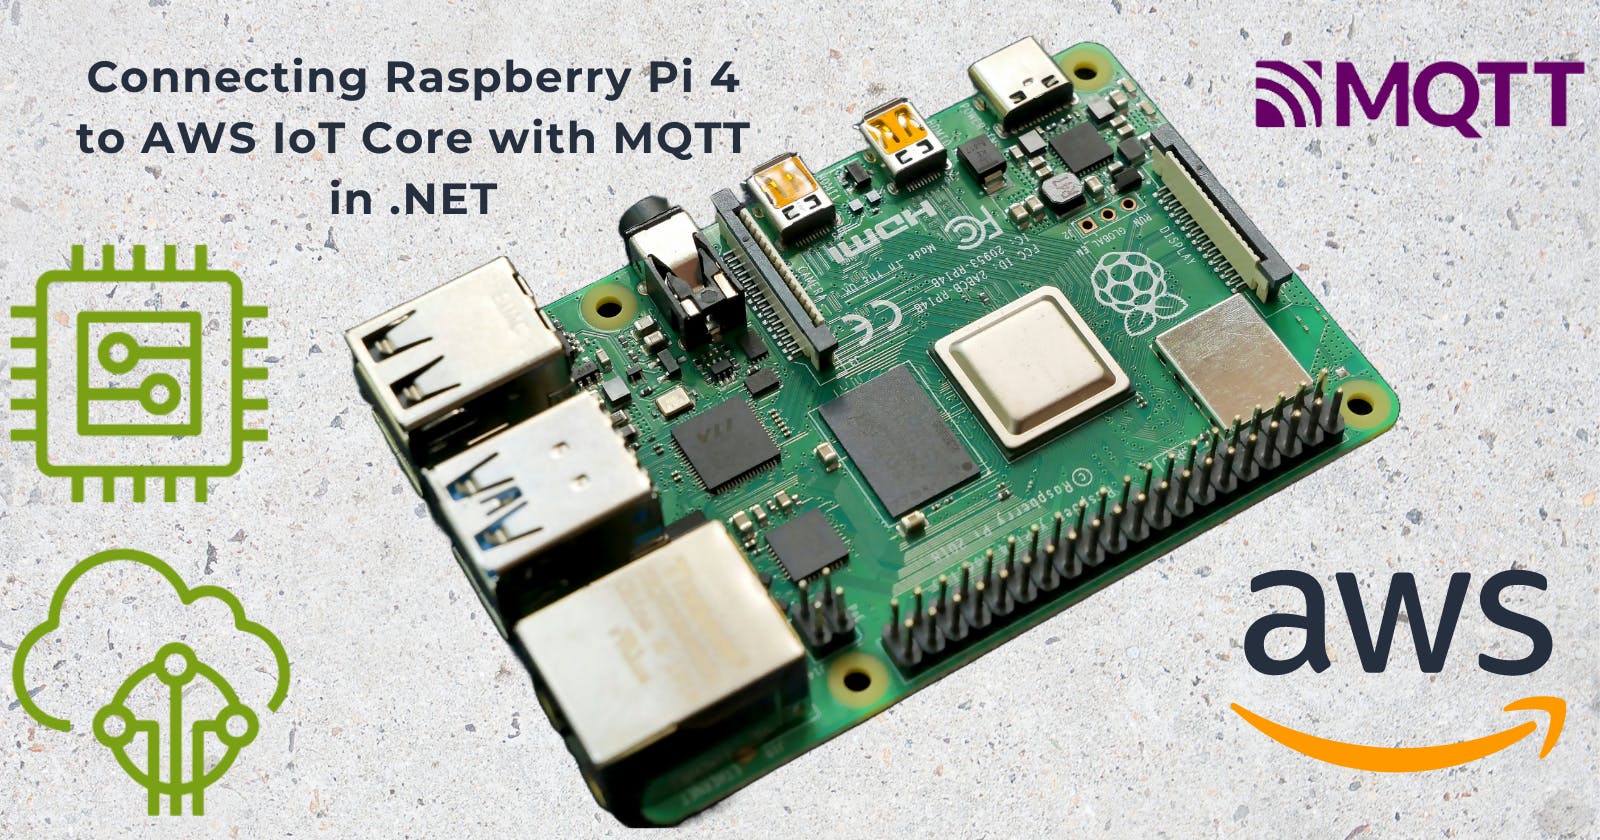 Connecting Raspberry Pi 4 to AWS IoT Core with MQTT in .NET